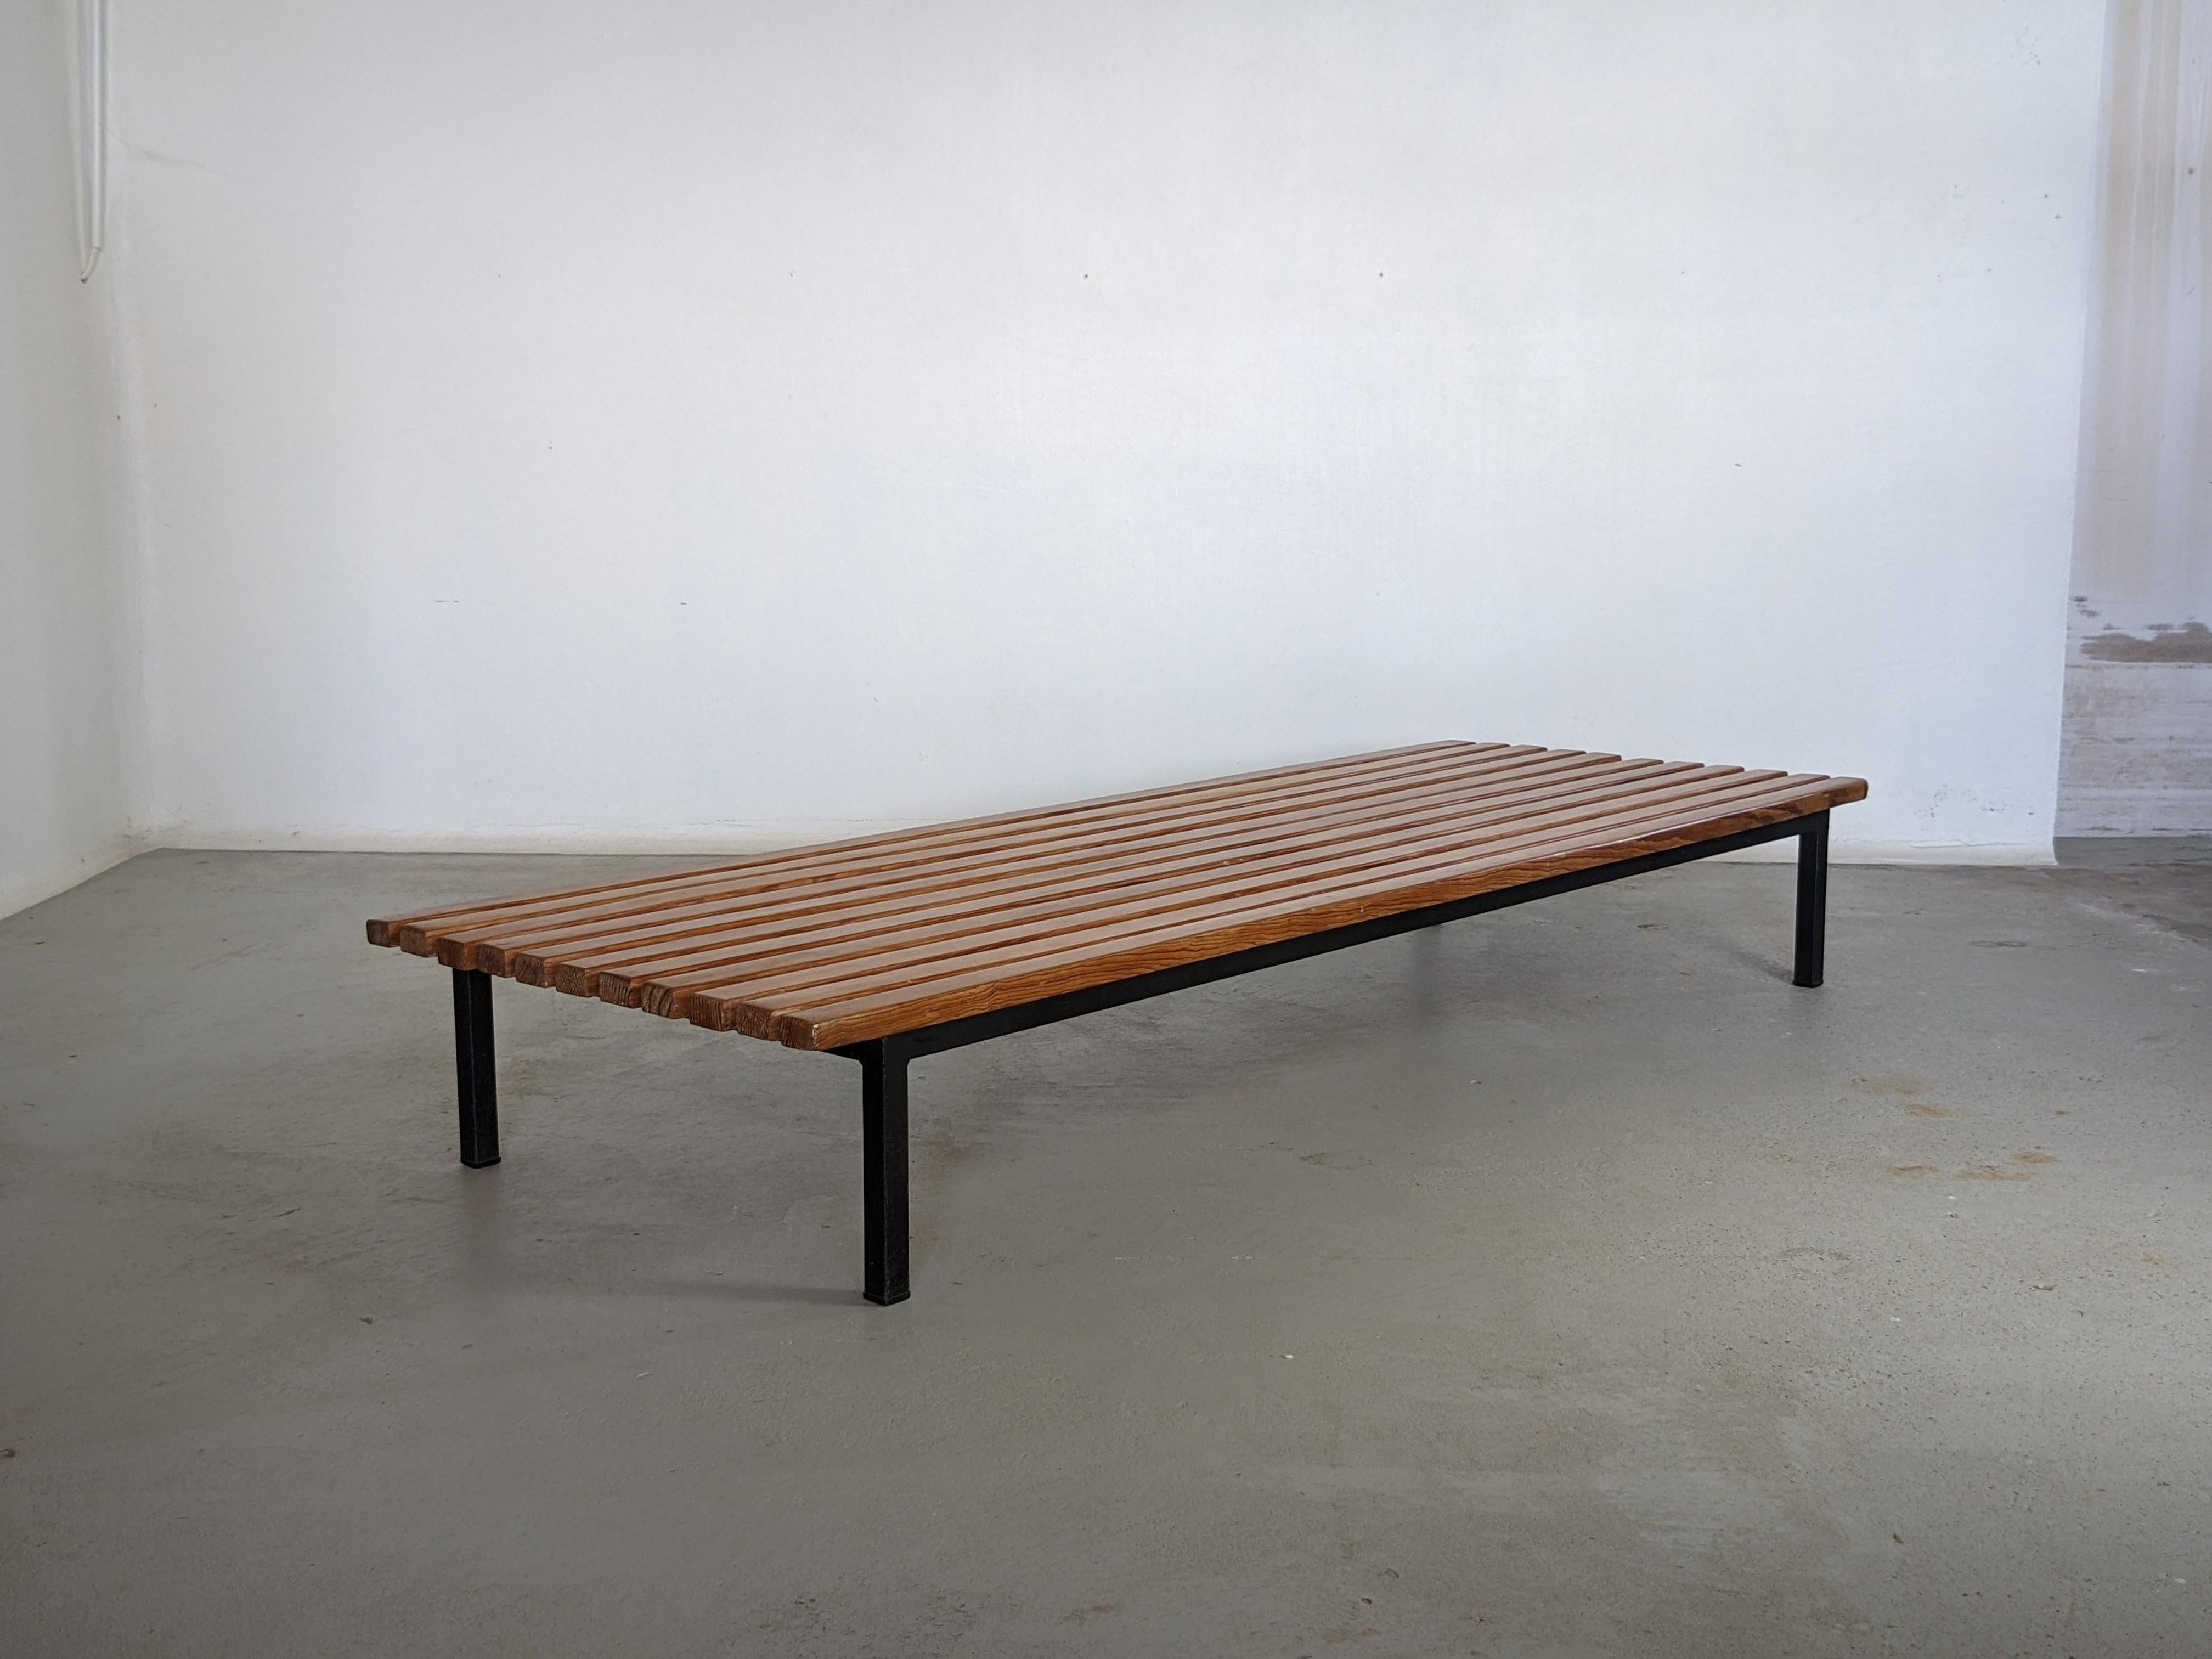 Slat bench or coffee table designed by Charlotte Perriand and produced by Steph Simon. 
It was made and used in the North African mining town of Cansado, Mauritania in the late 1950s. 
Solid ash wood slats on a metal frame with four legs.